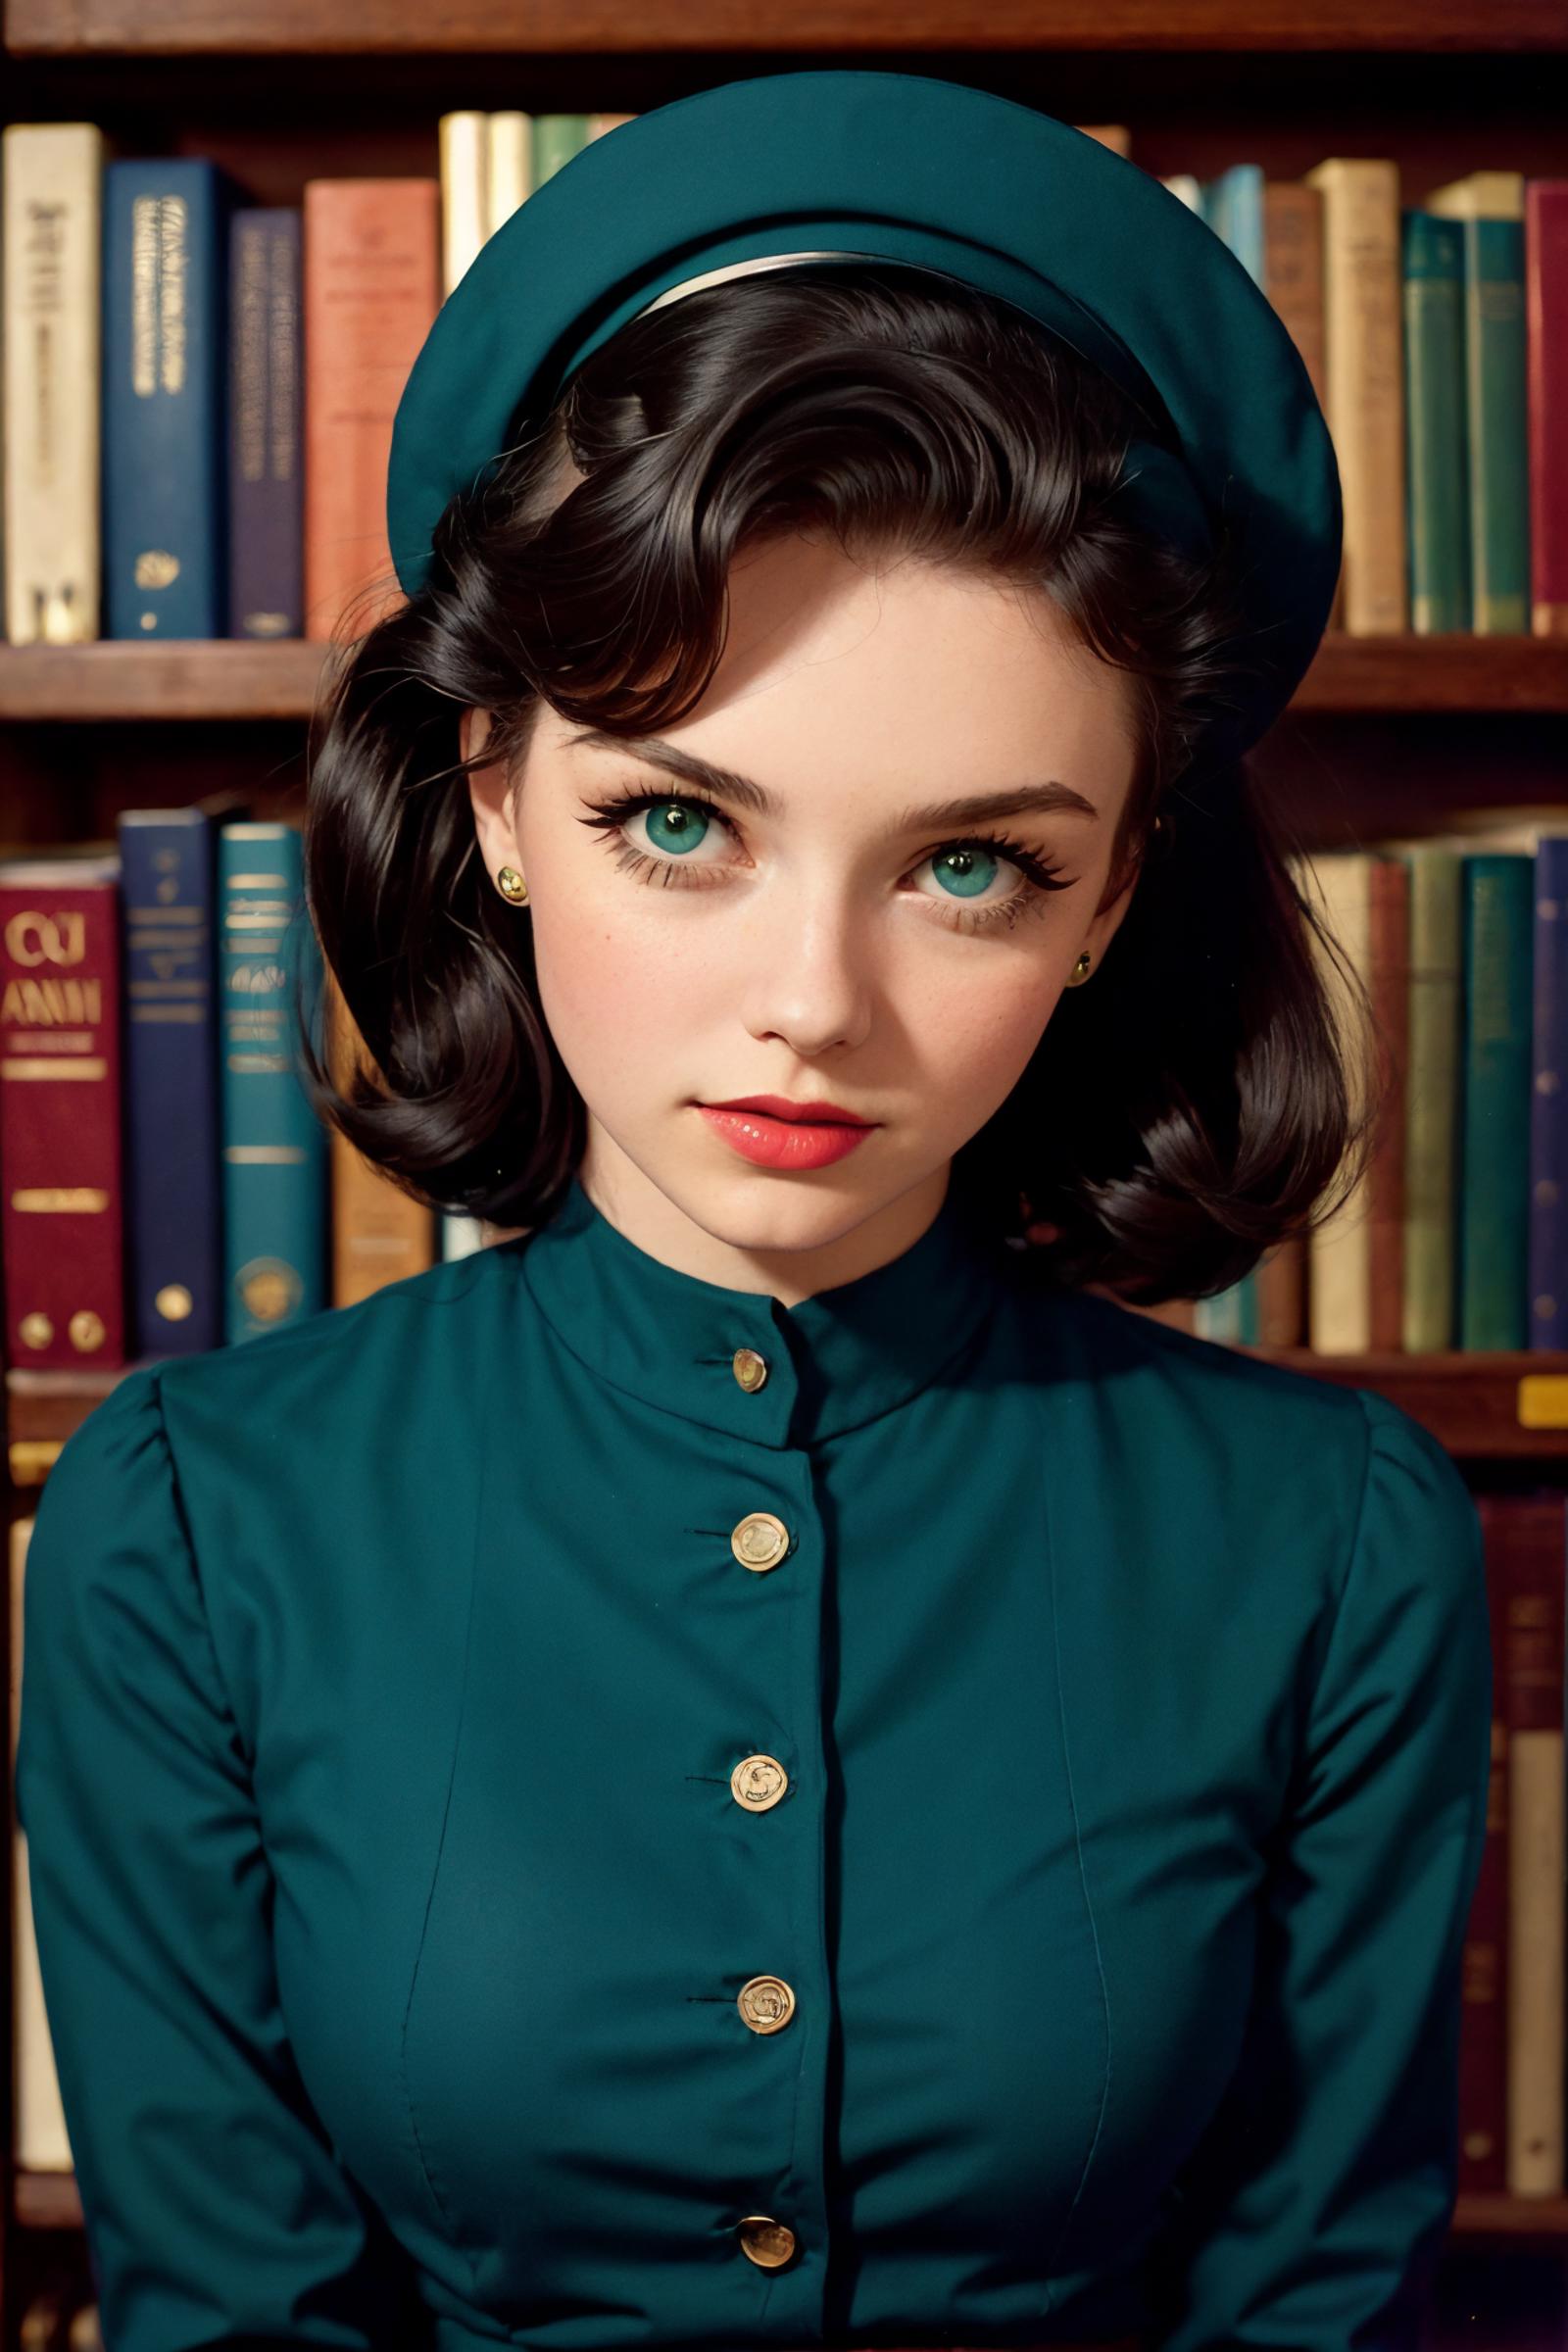 A young woman with blue eyes and a green shirt poses in front of a bookshelf.